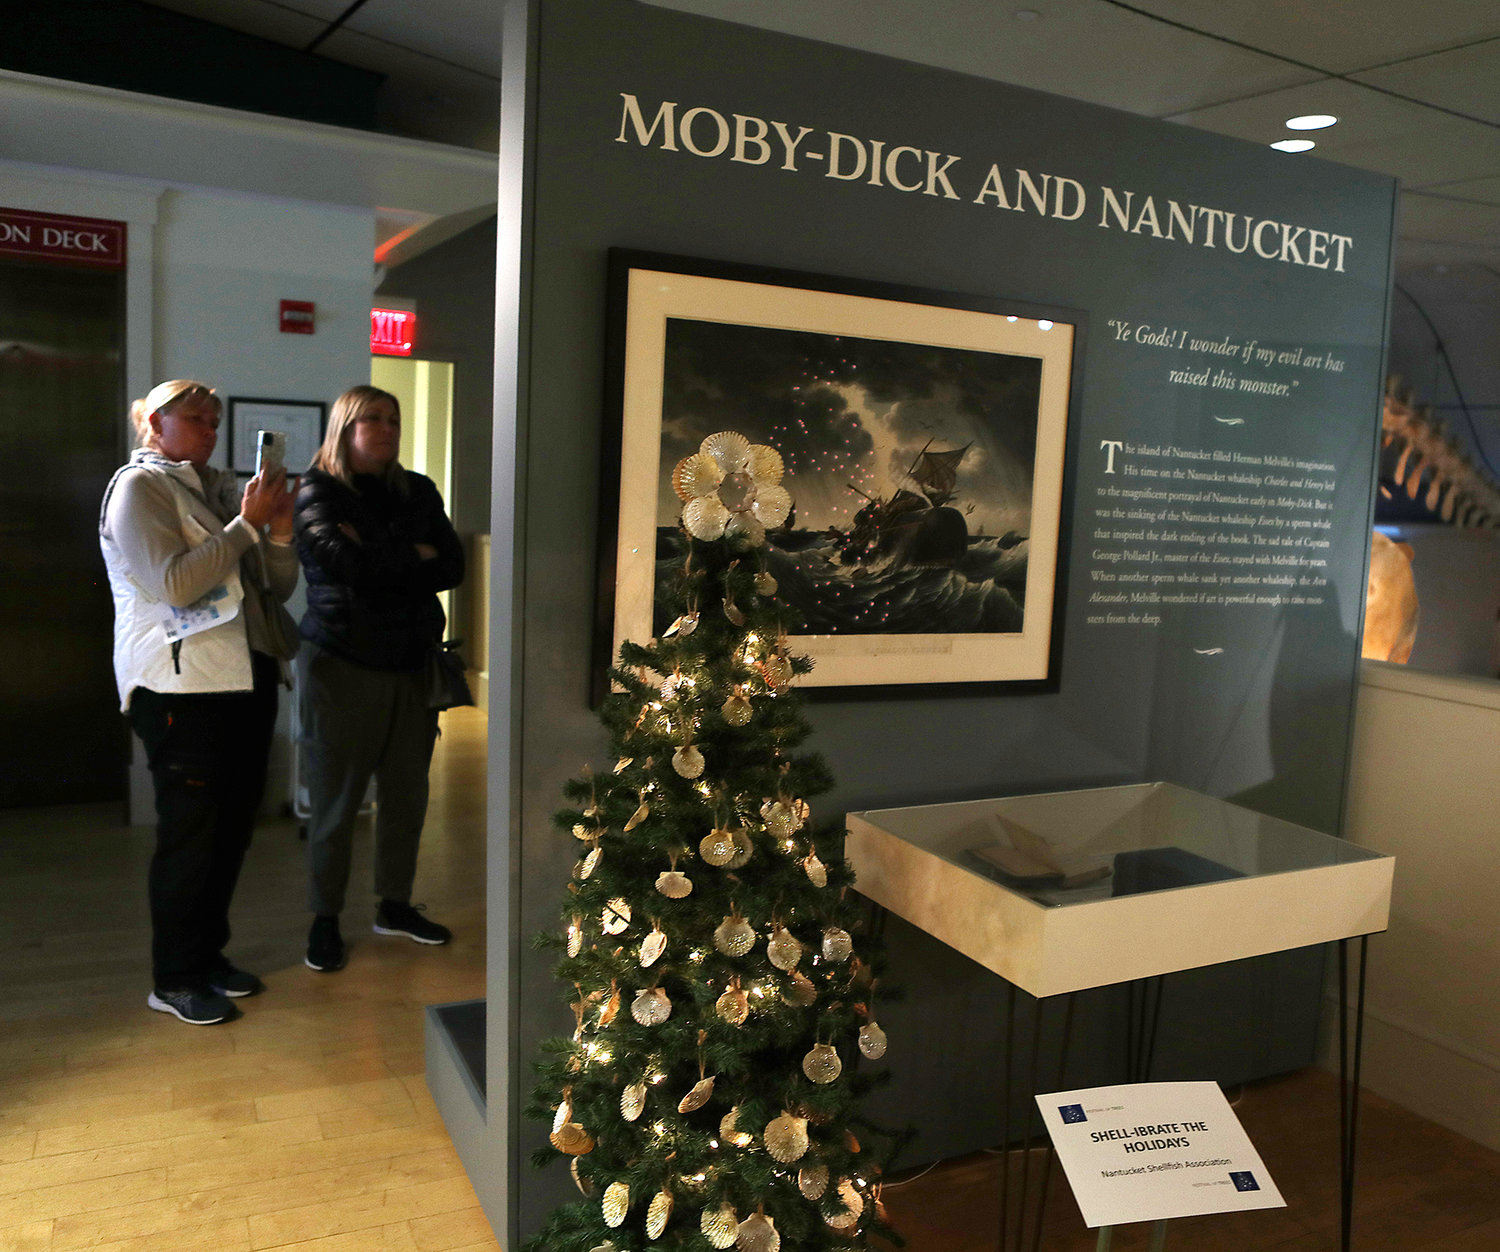 Nantucket Shellfish Association's "Shell-Ibrate The Holidays" as visitors look at another tree. Nantucket Historical Association Festival of Trees at the Whaling Museum.